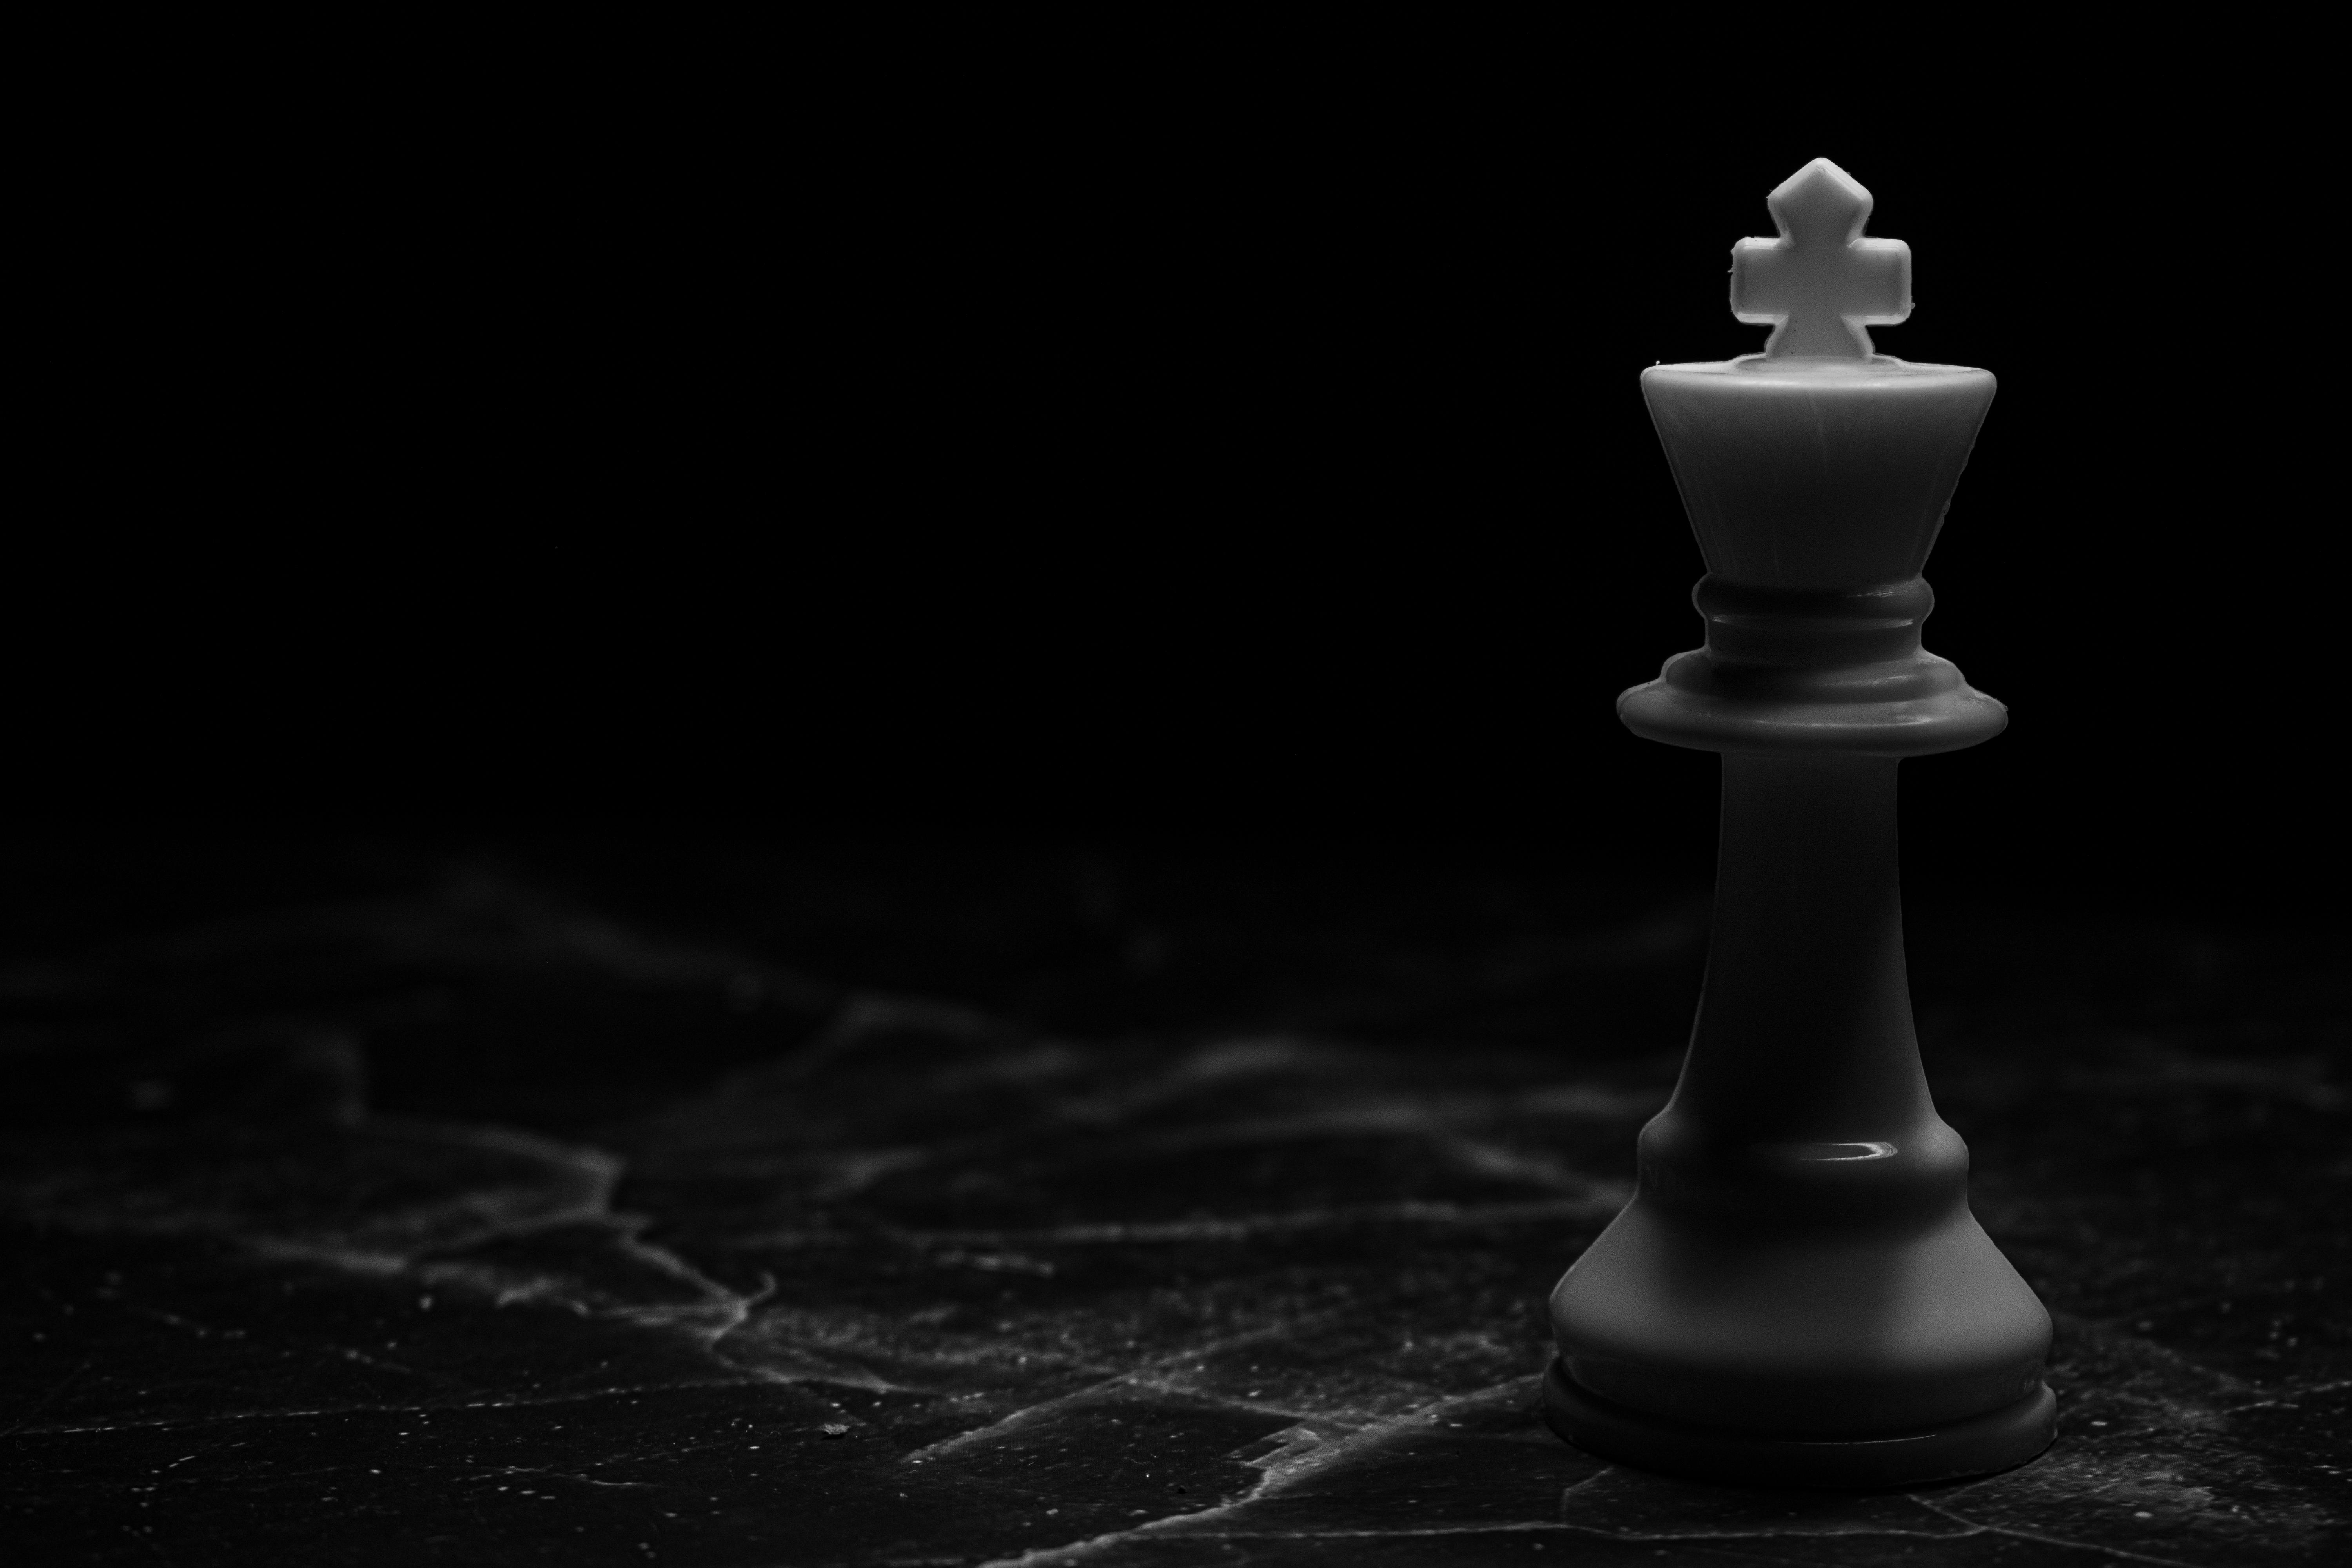 4580560 chess, board games, creativity - Rare Gallery HD Wallpapers